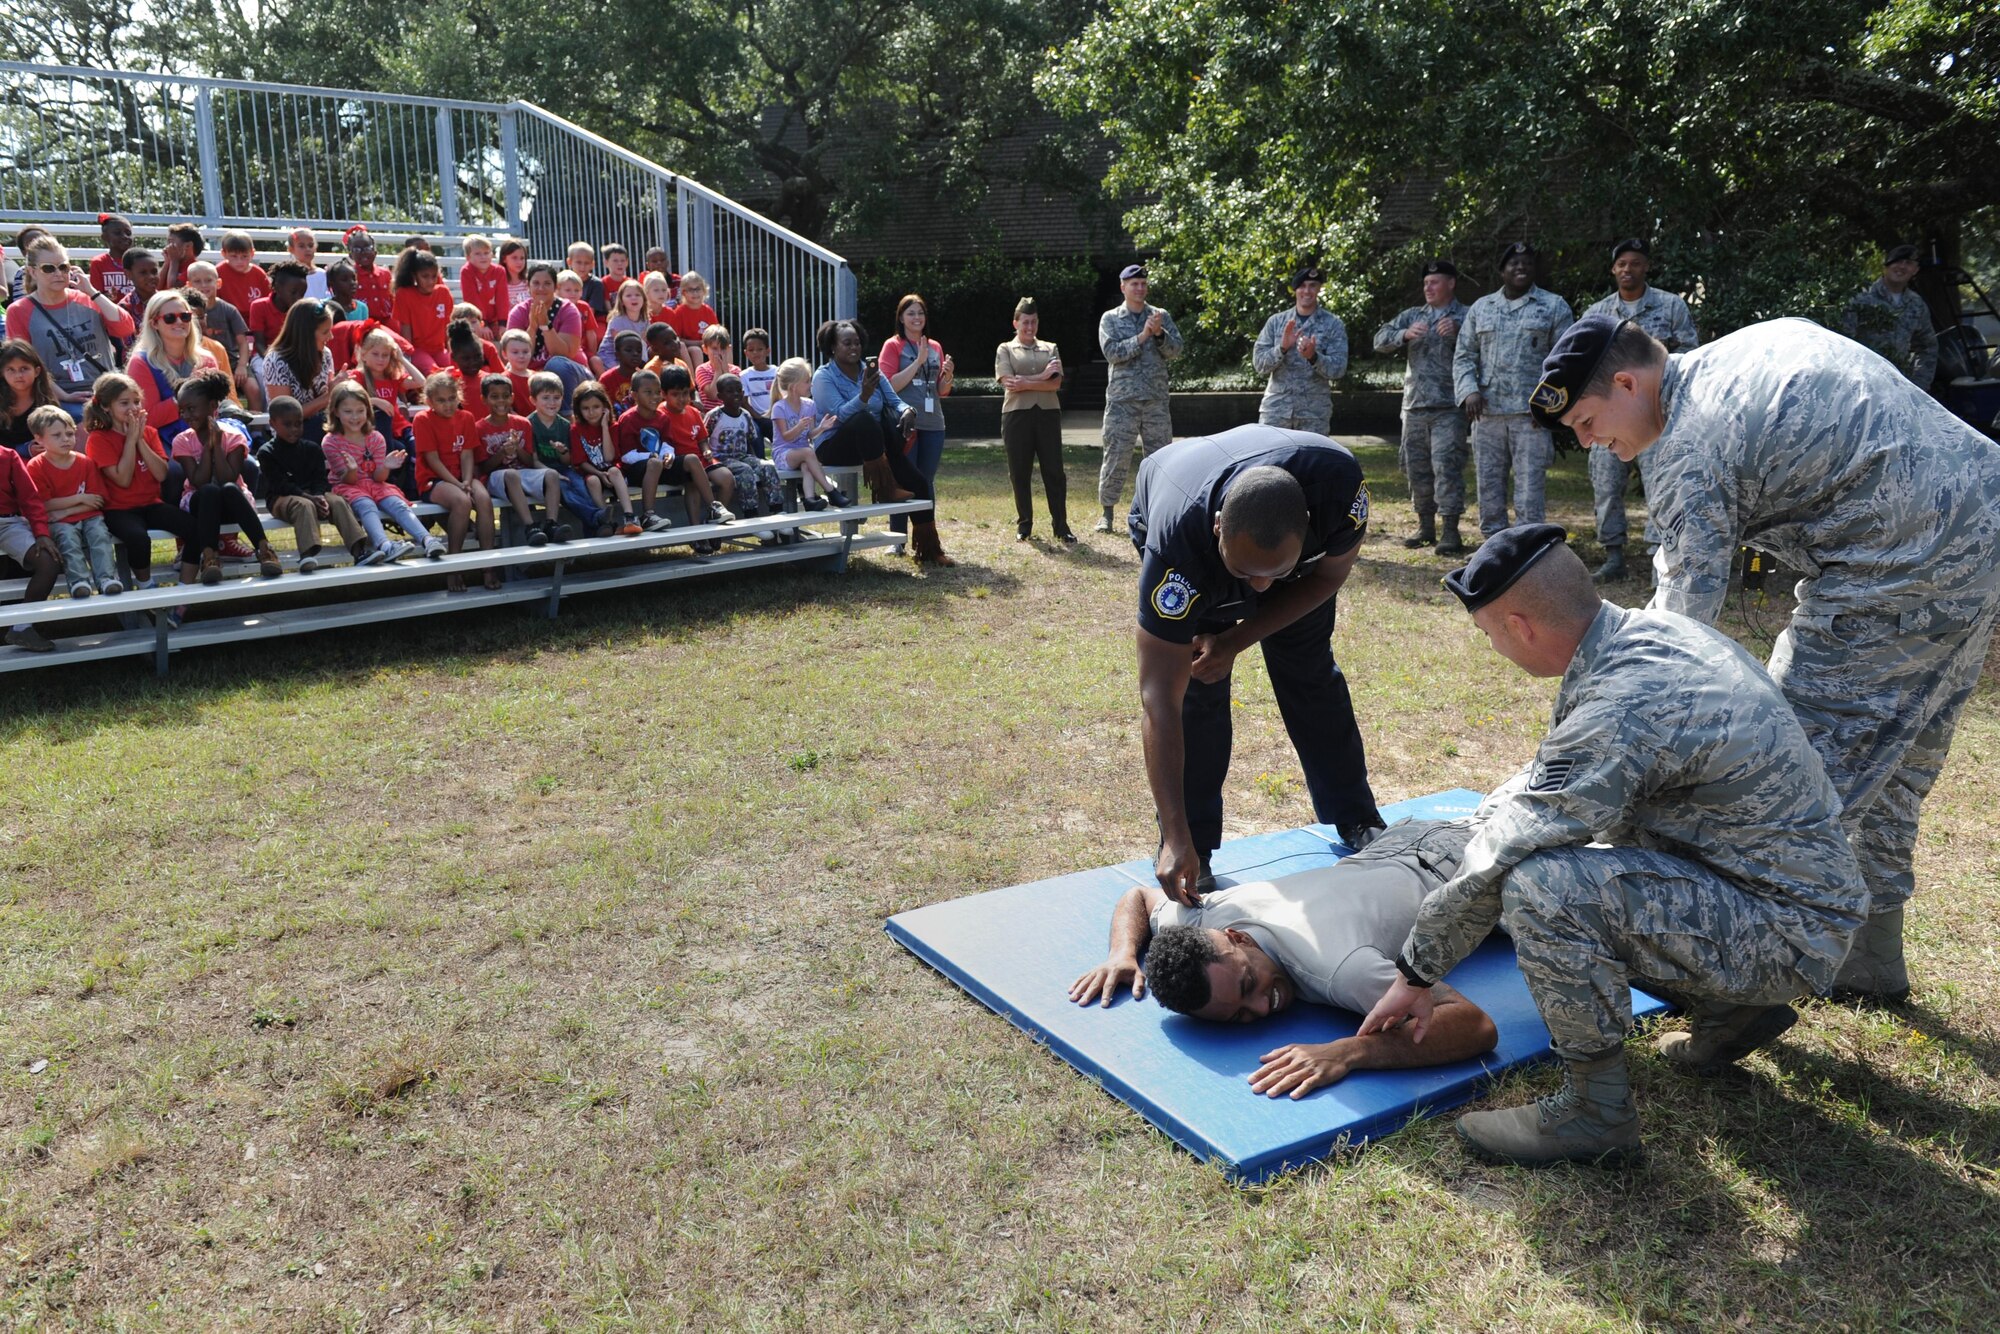 Members of the 81st Security Forces Squadron provide a tazing demonstration to Jeff Davis Elementary School first graders during a field trip to the 81st SFS Oct. 28, 2016, on Keesler Air Force Base, Miss. The children also toured the Keesler Fire Department where they received a demonstration on the proper wear of firefighter bunker gear and fire prevention safety information. (U.S. Air Force photo by Kemberly Groue/Released)